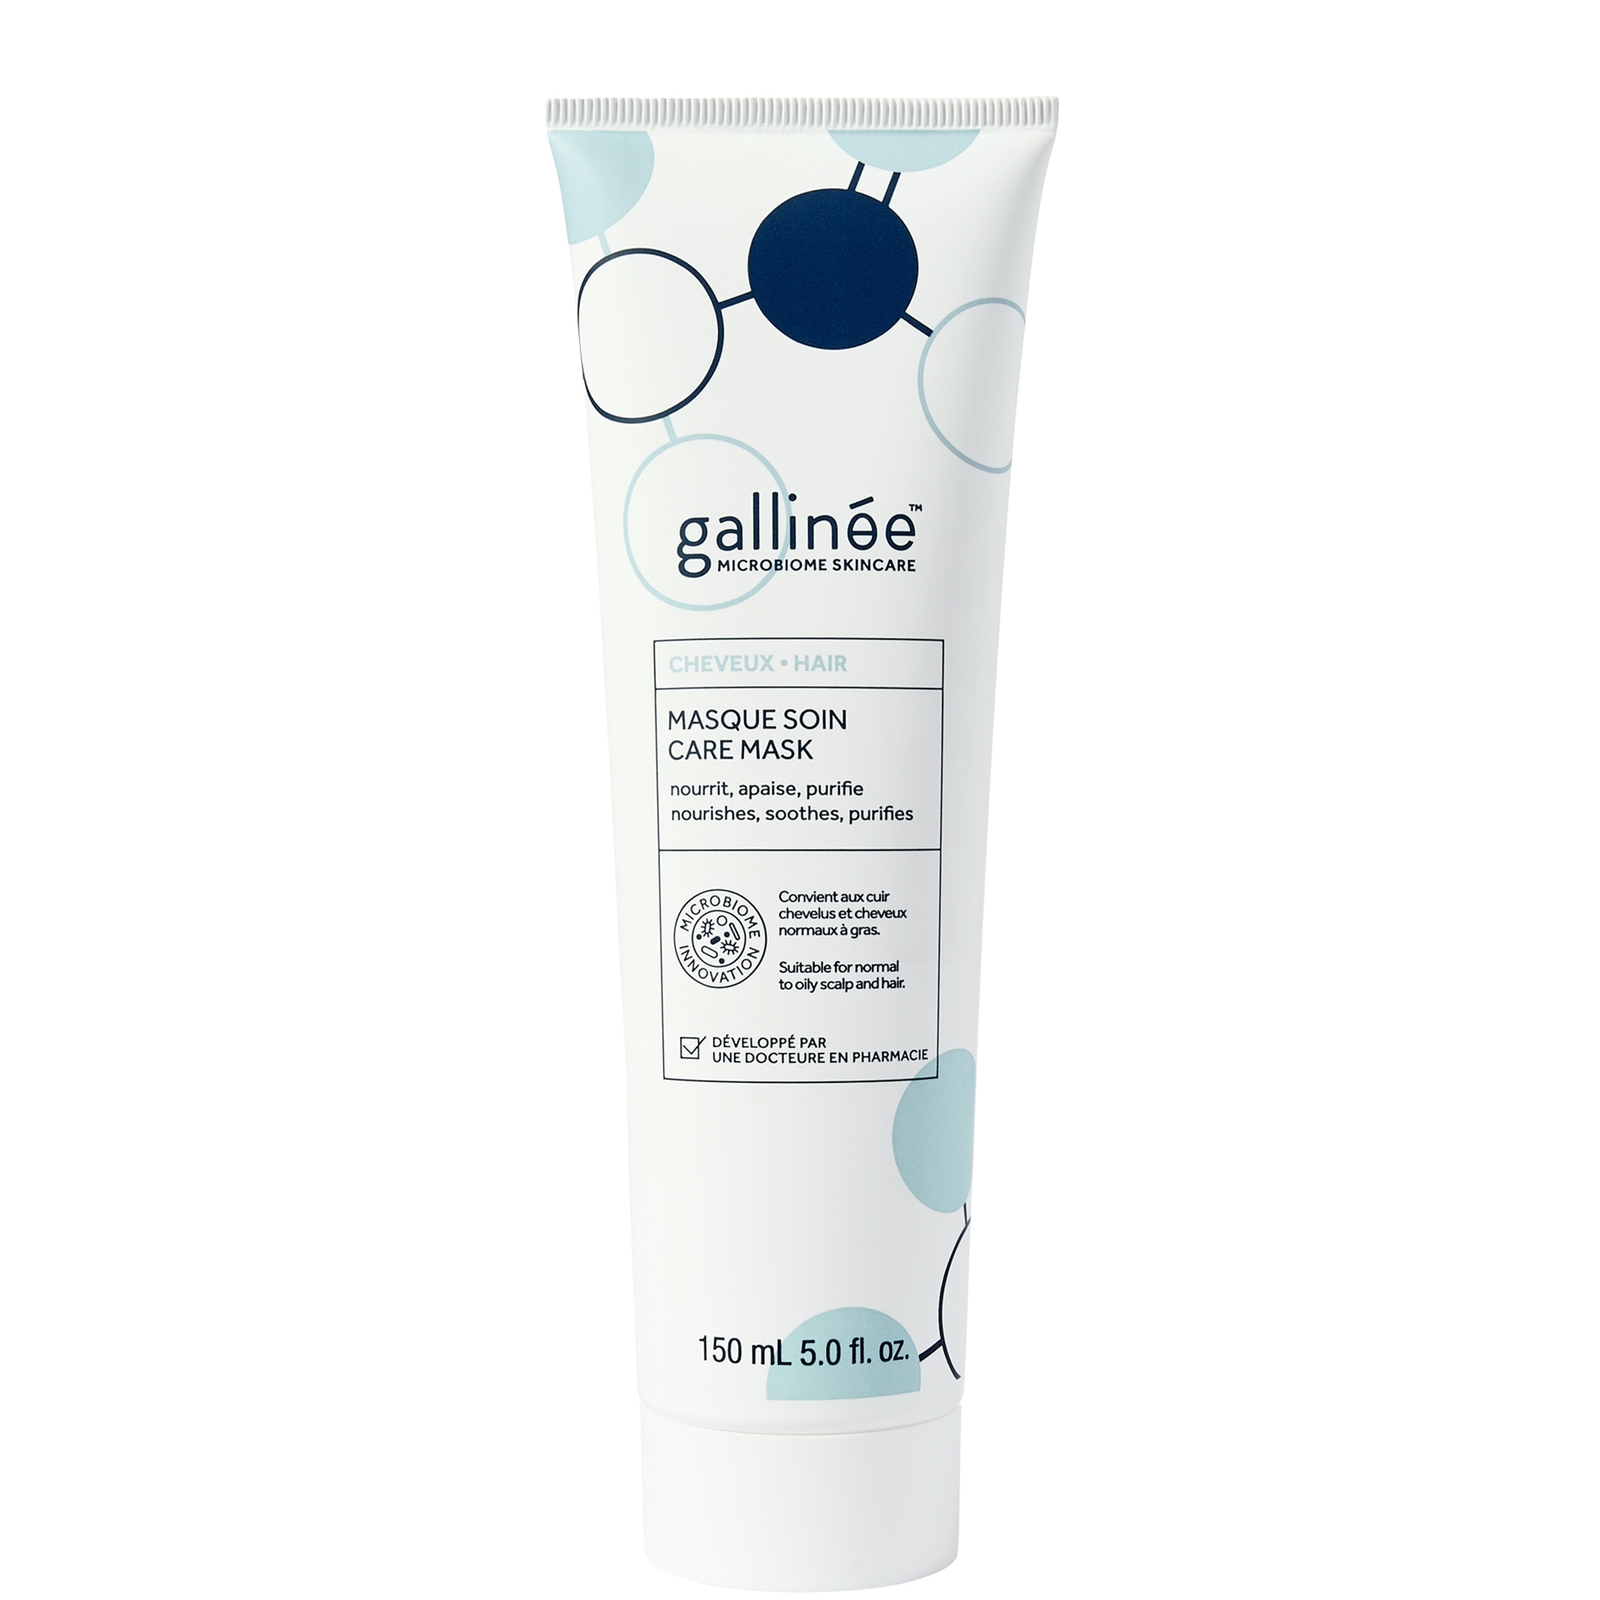 Gallinee Prebiotic Hair and Scalp Care Mask 150ml